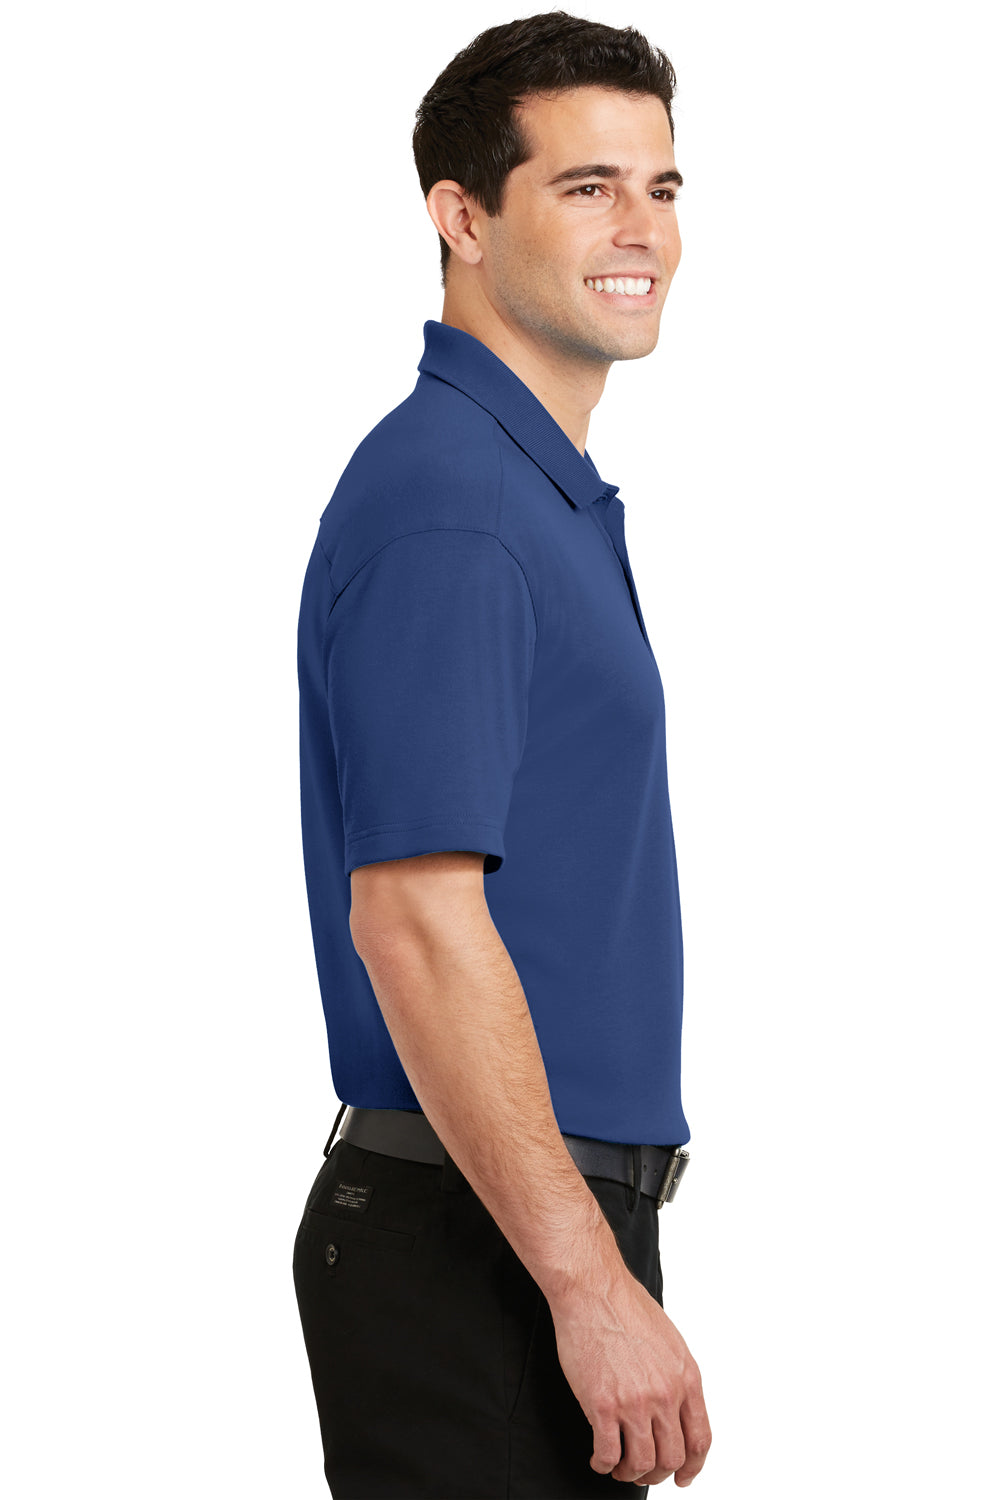 Port Authority K5200 Mens Silk Touch Performance Moisture Wicking Short Sleeve Polo Shirt Royal Blue Side